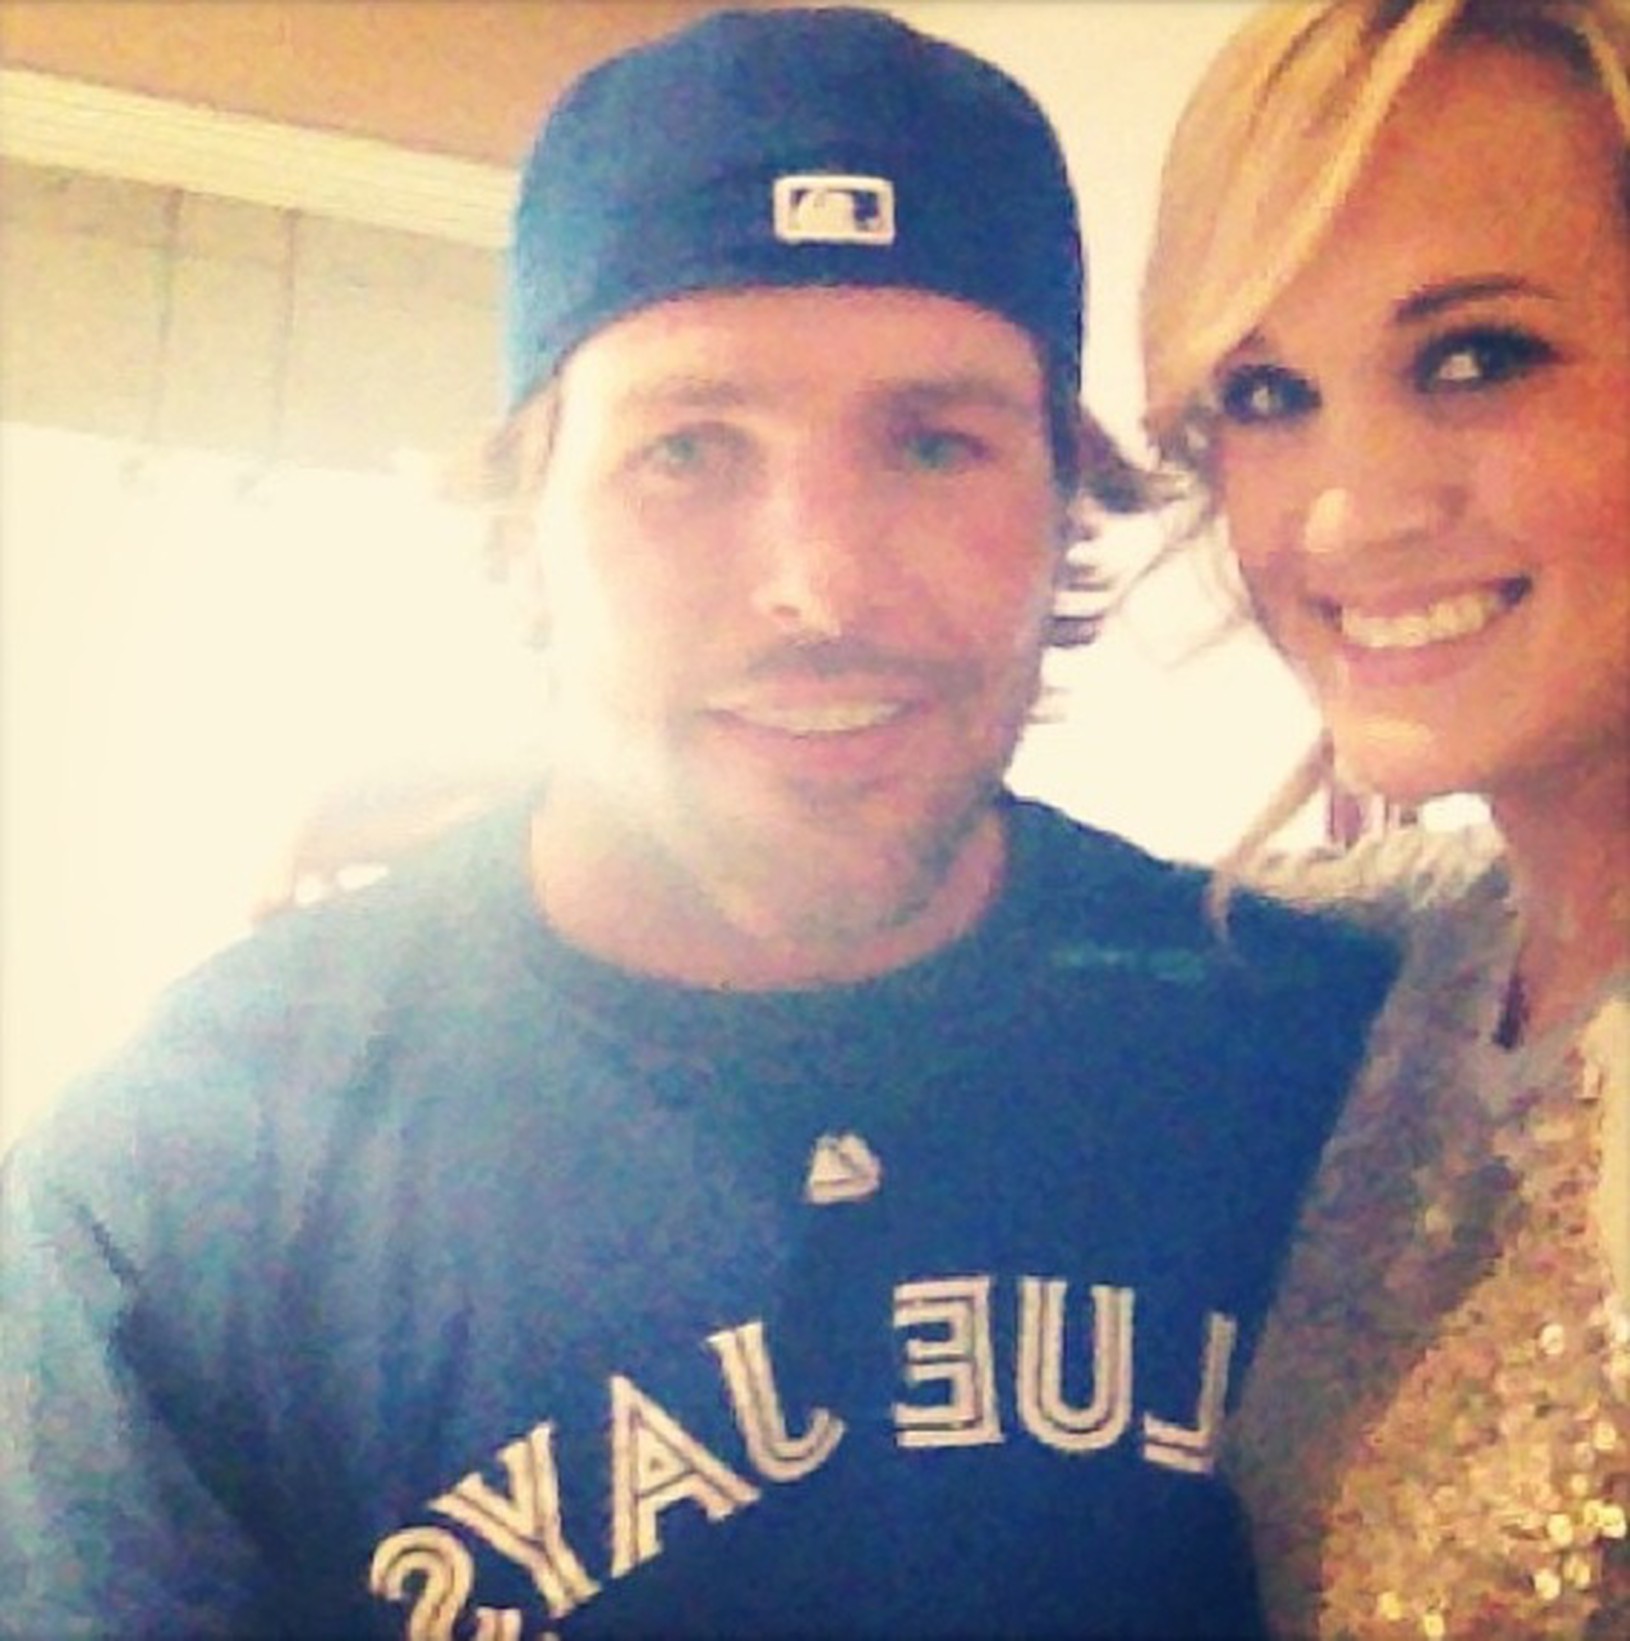 Mike Fisher a Carrie